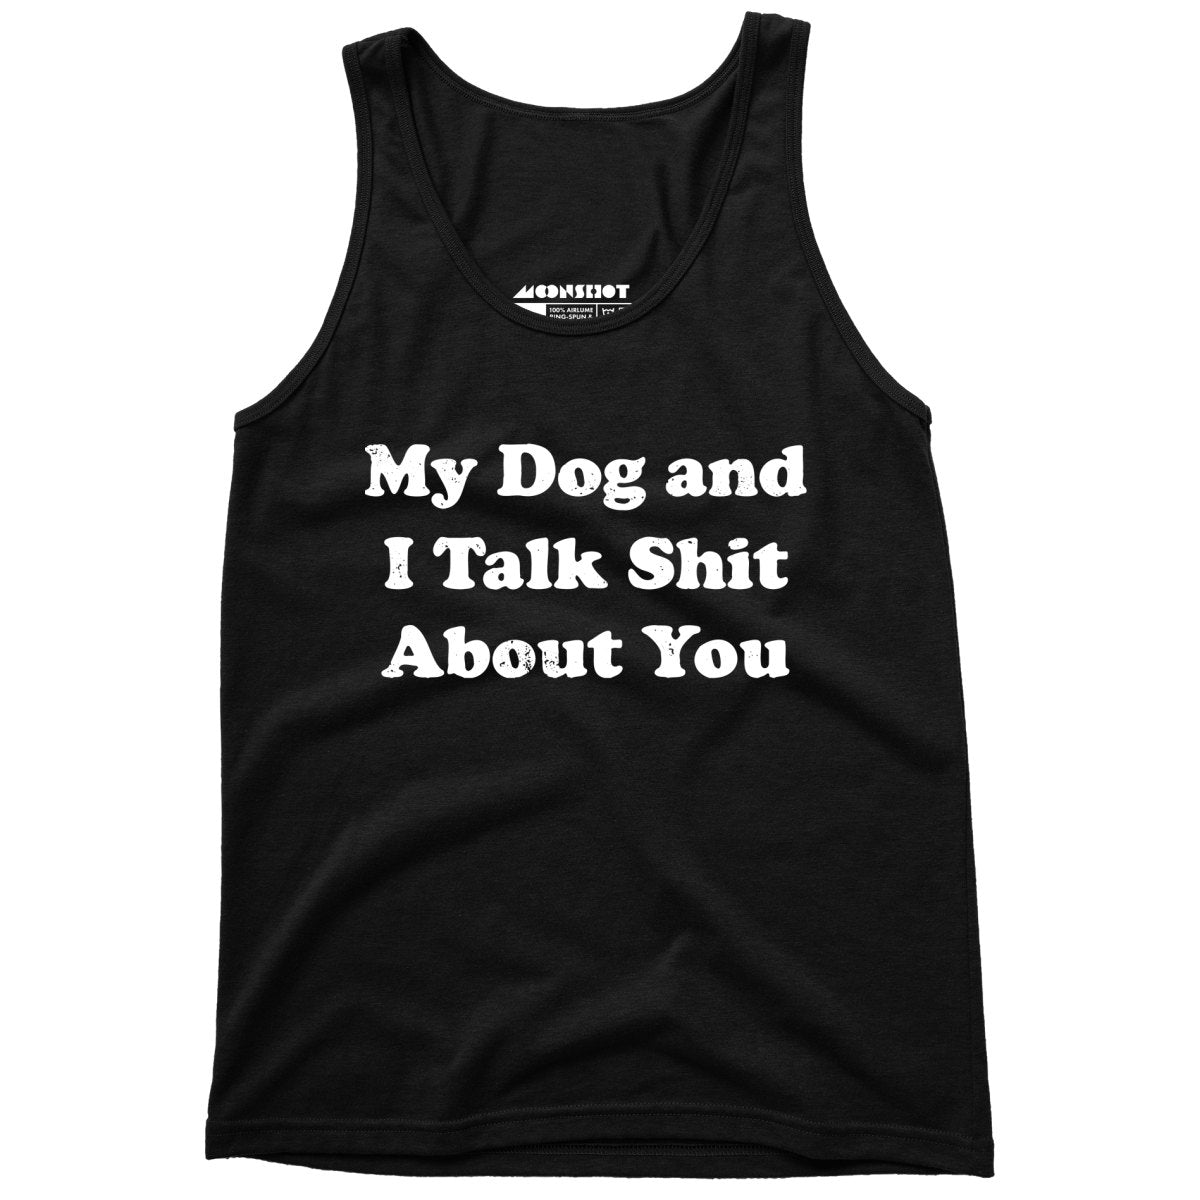 My Dog and I Talk Shit About You - Unisex Tank Top